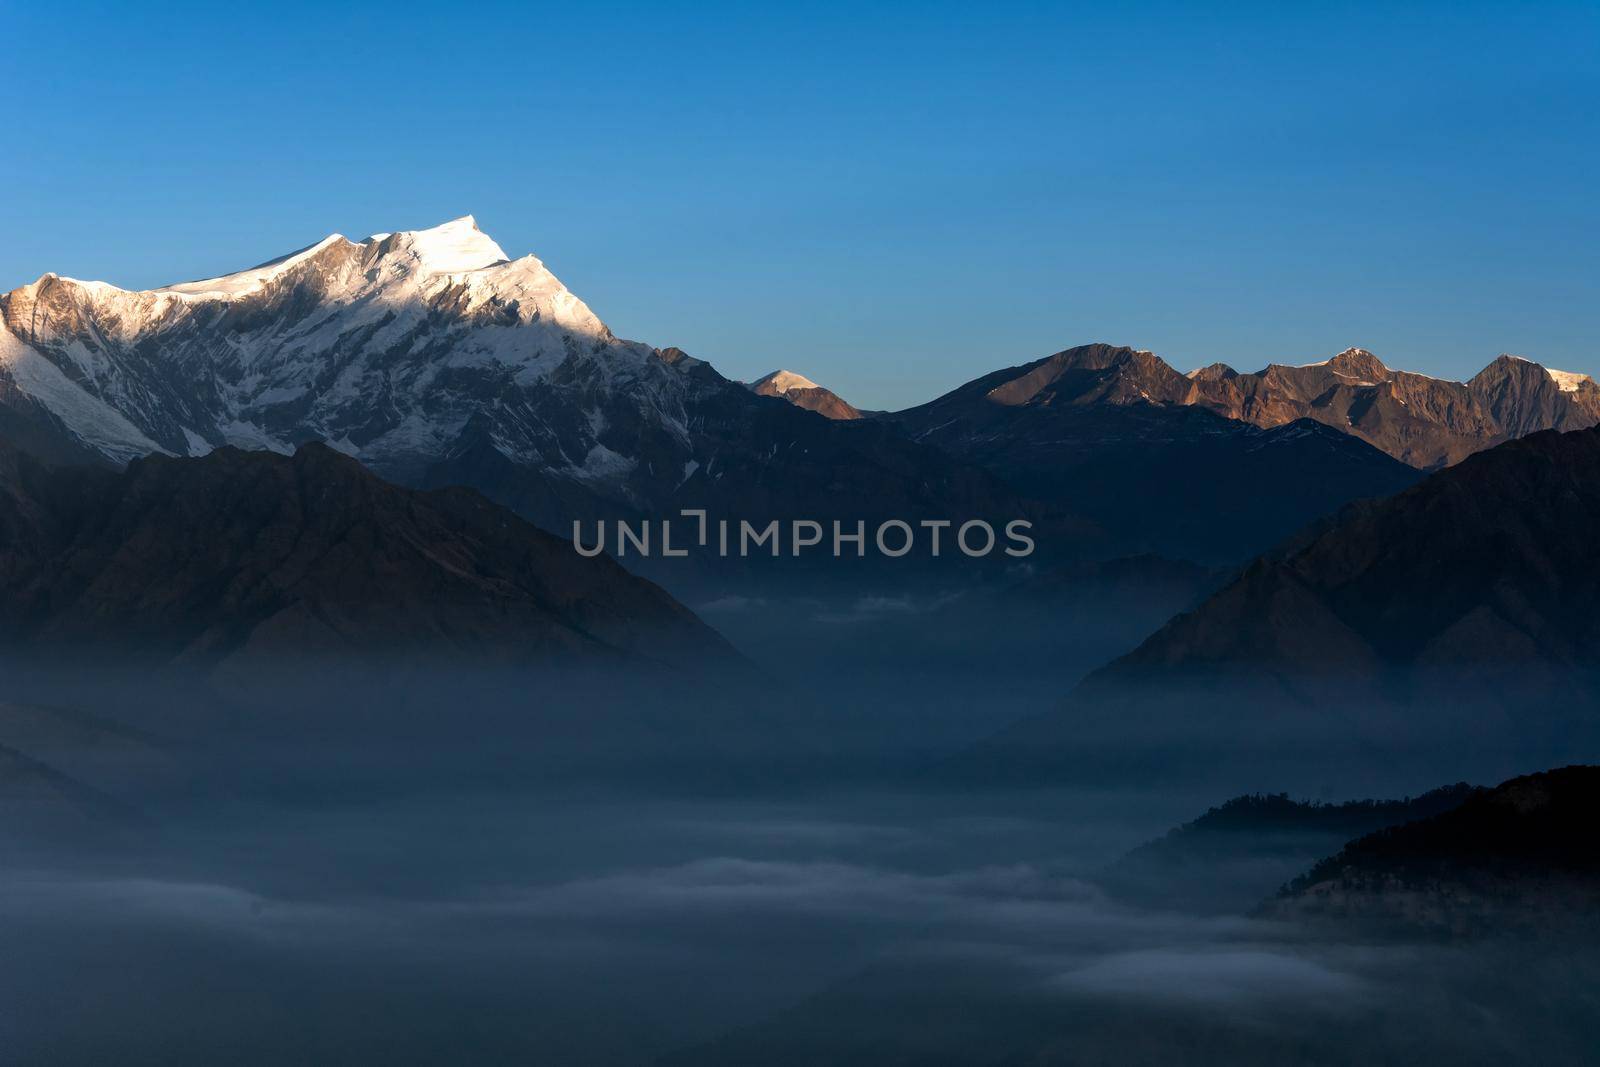 Nature view of Himalayan mountain range at Poon hill view point,Nepal. Poon hill is the famous view point in Gorepani village to see beautiful sunrise over Annapurna mountain range in Nepal
 by Nuamfolio